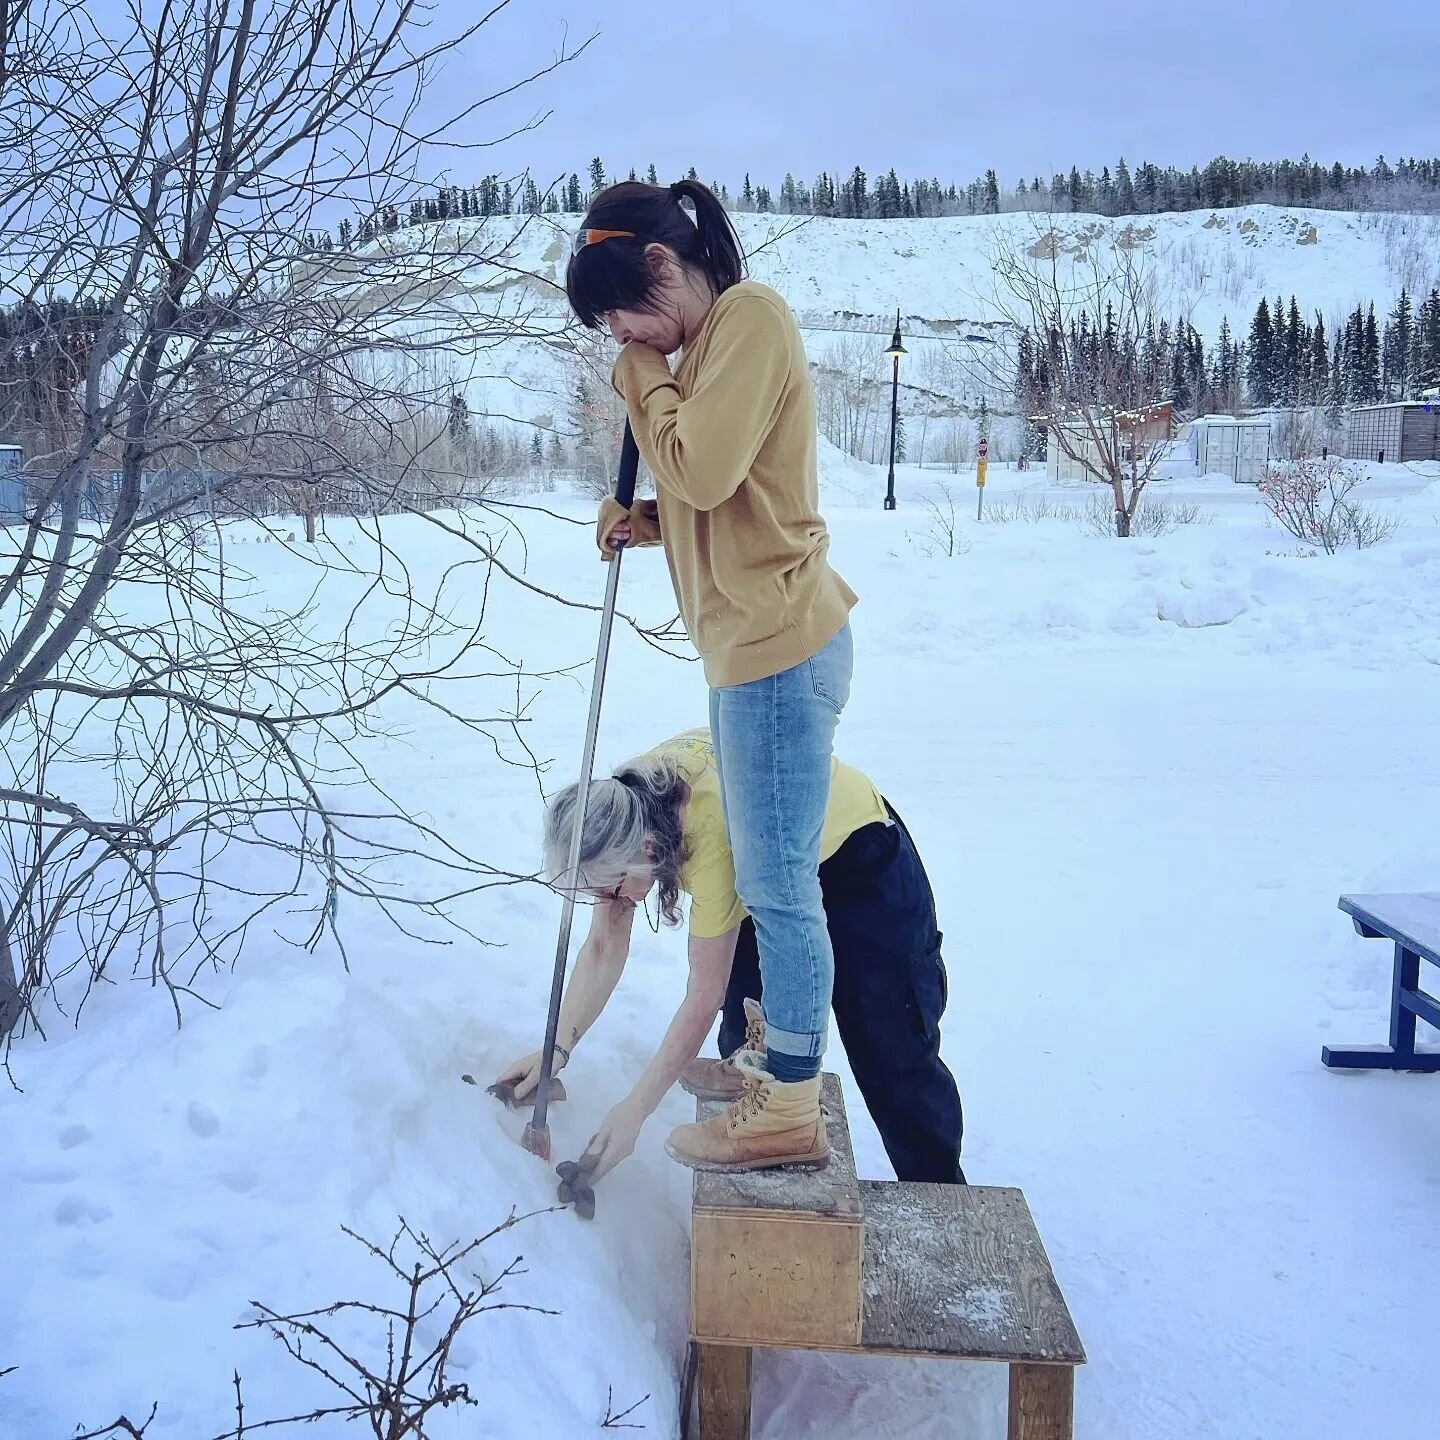 blowing glass into snow with Lu, seeing what shapes we can make. #lumelstudios #glassexperiments #whitehorse #yukonart